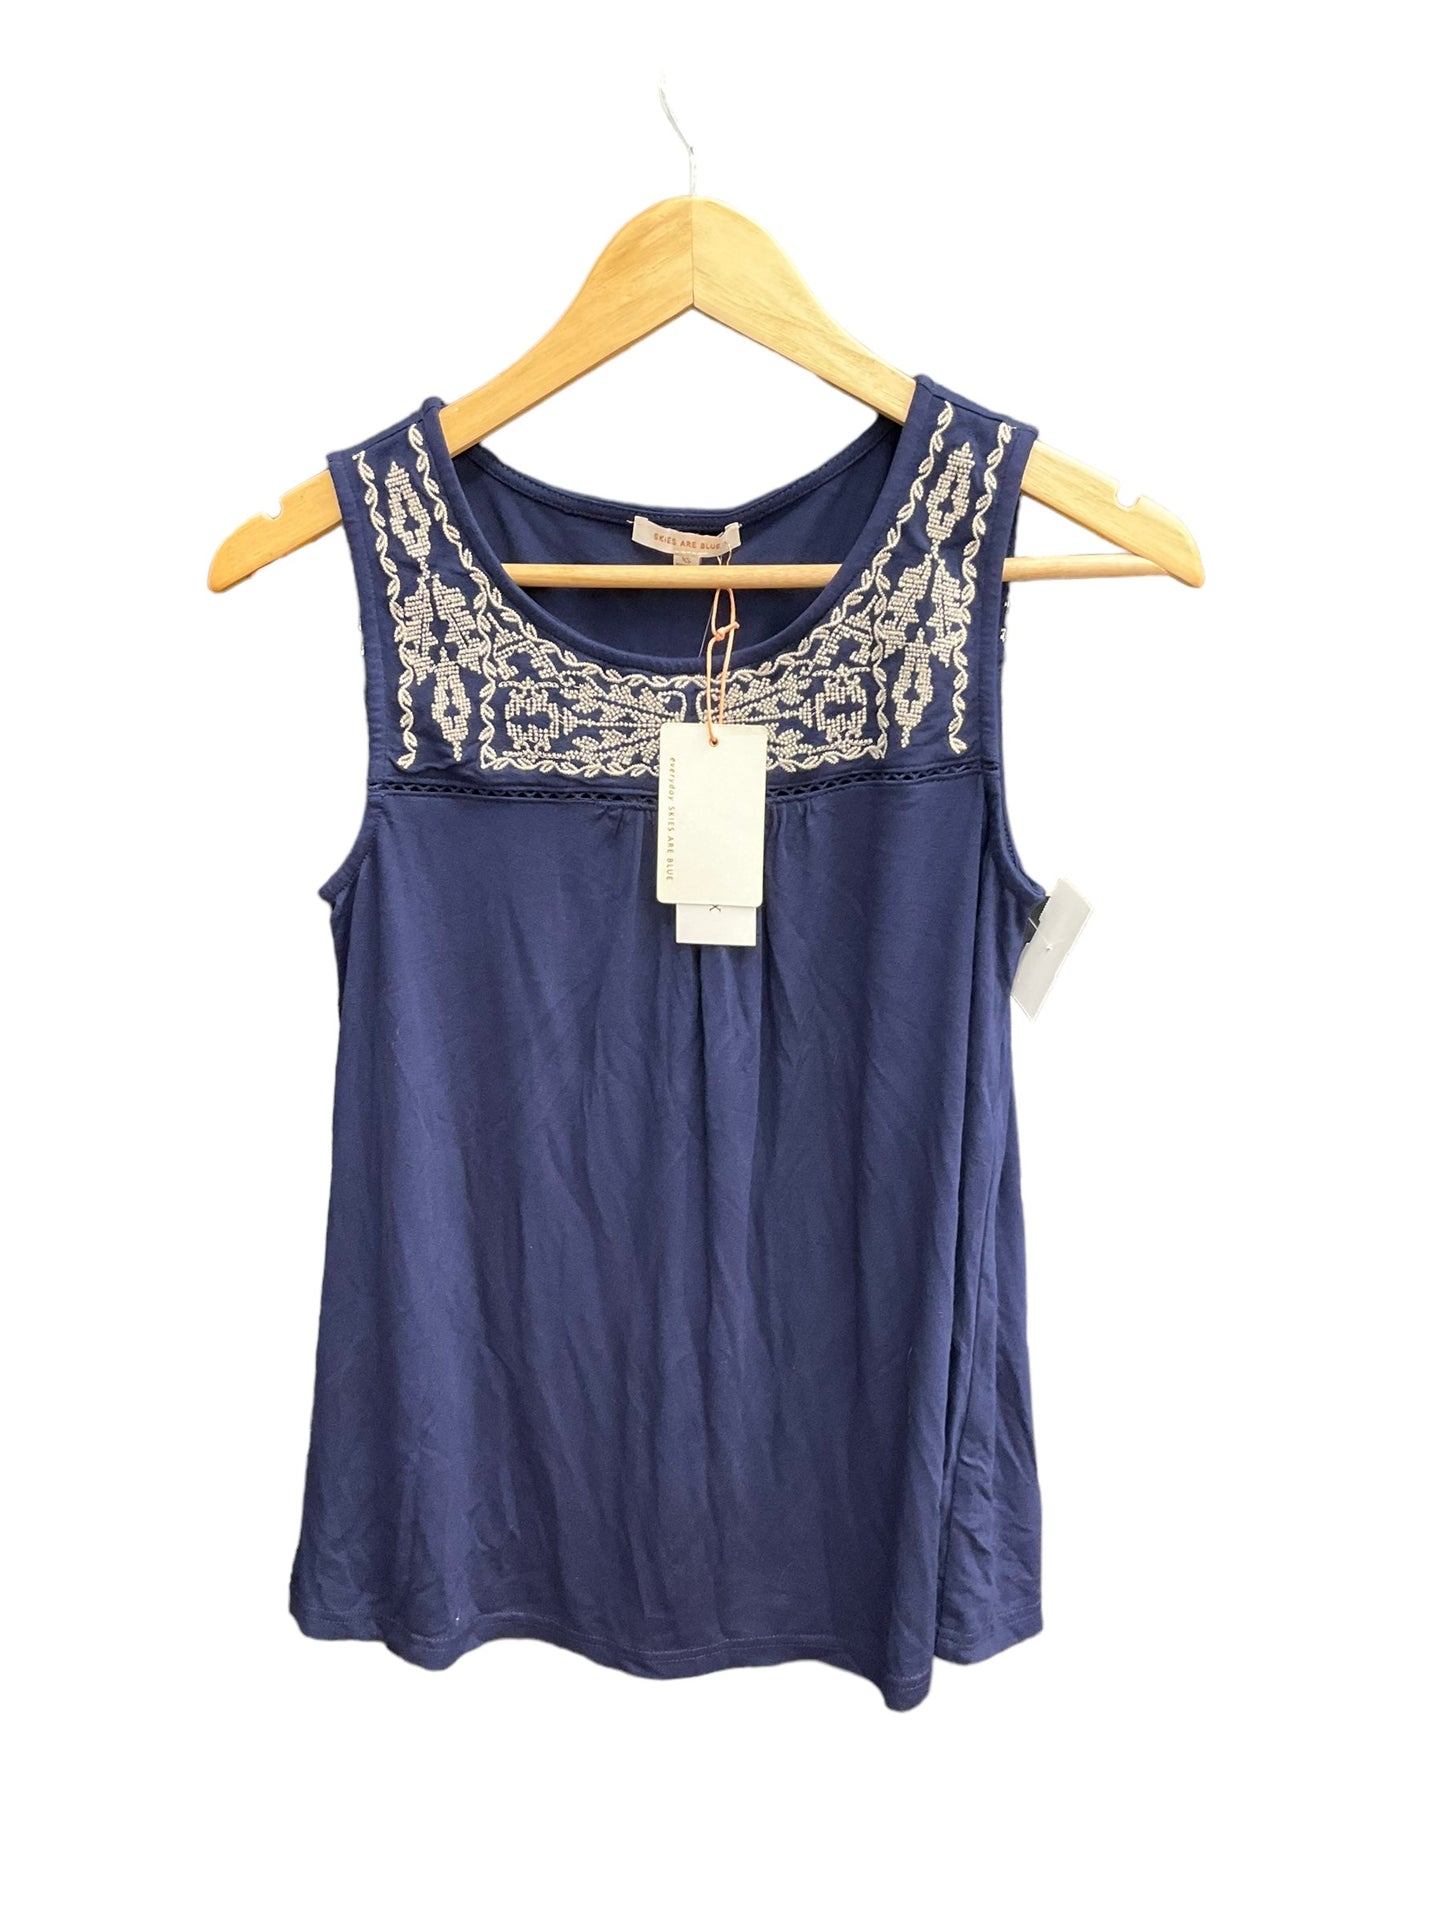 Blue & White Top Sleeveless Skies Are Blue, Size Xs